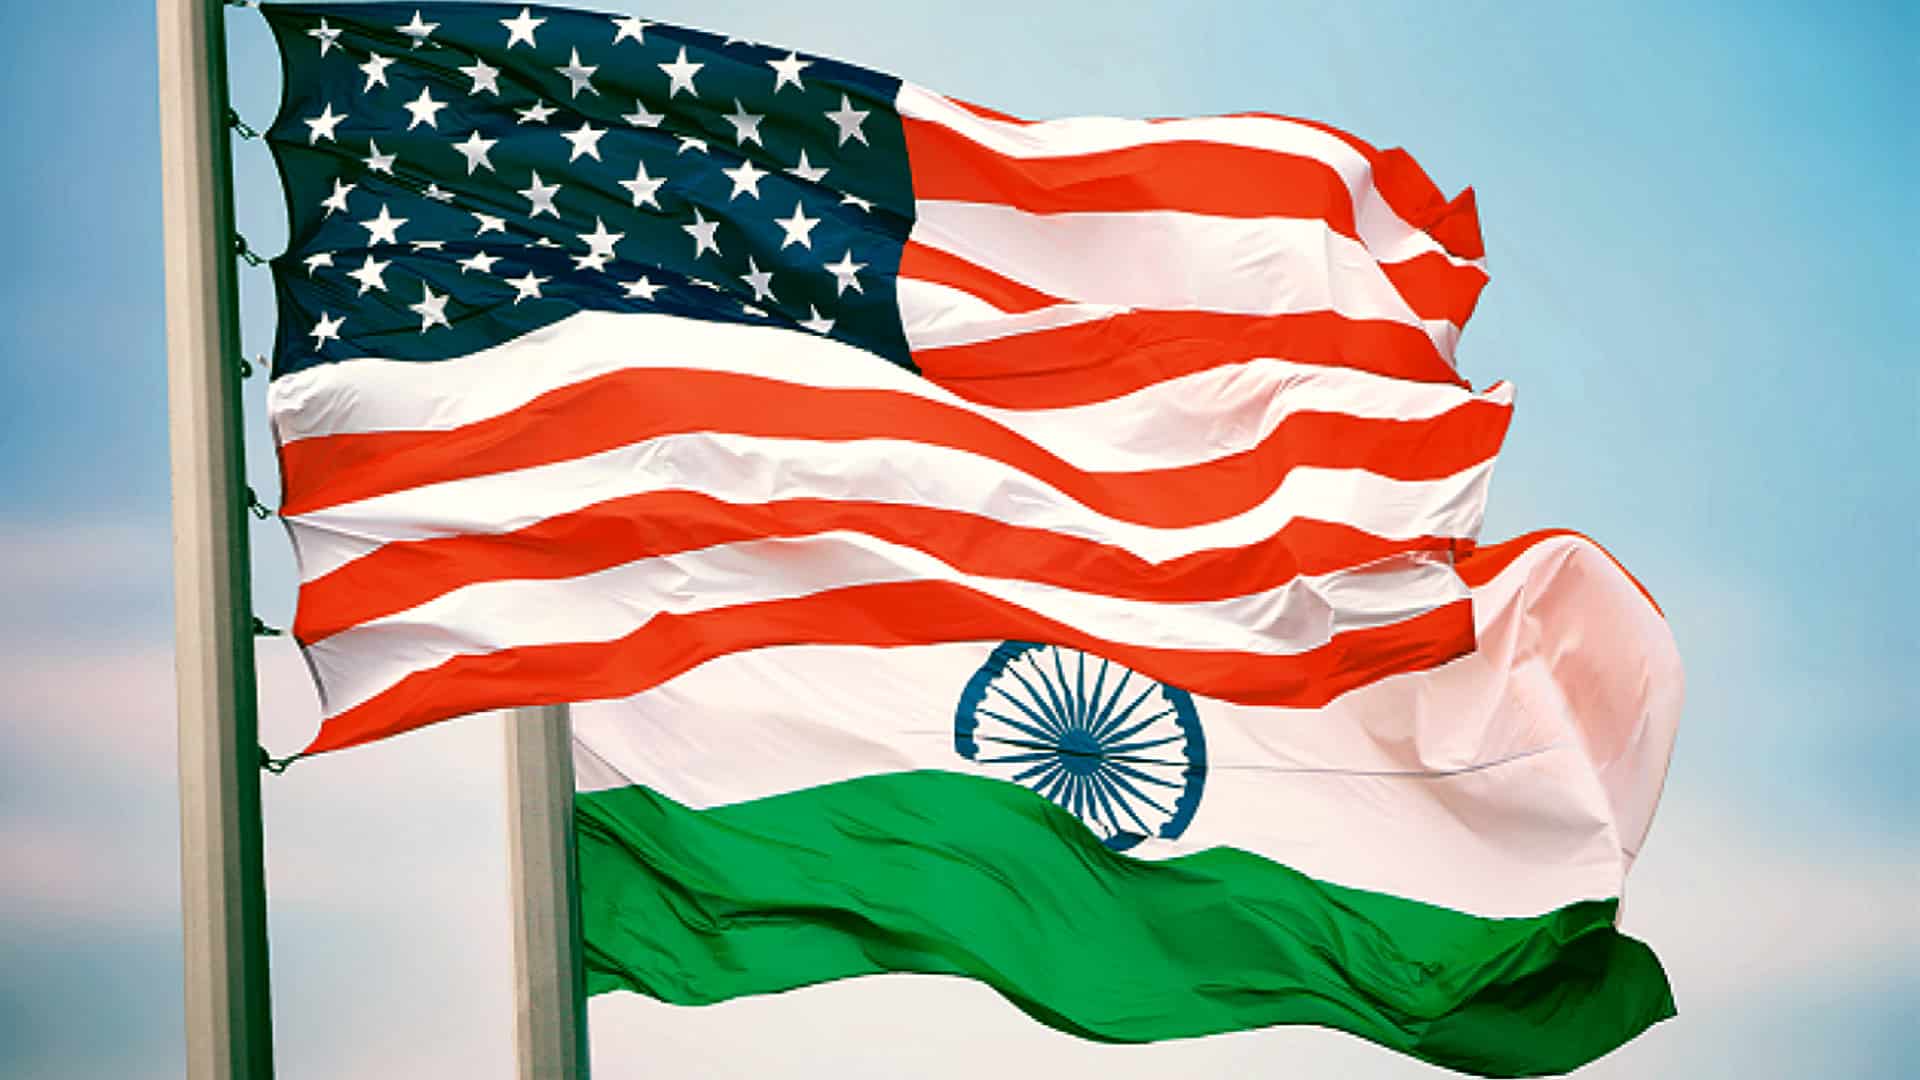 'Make in India' campaign epitomises challenges facing US-India trade relationship: USTR Report